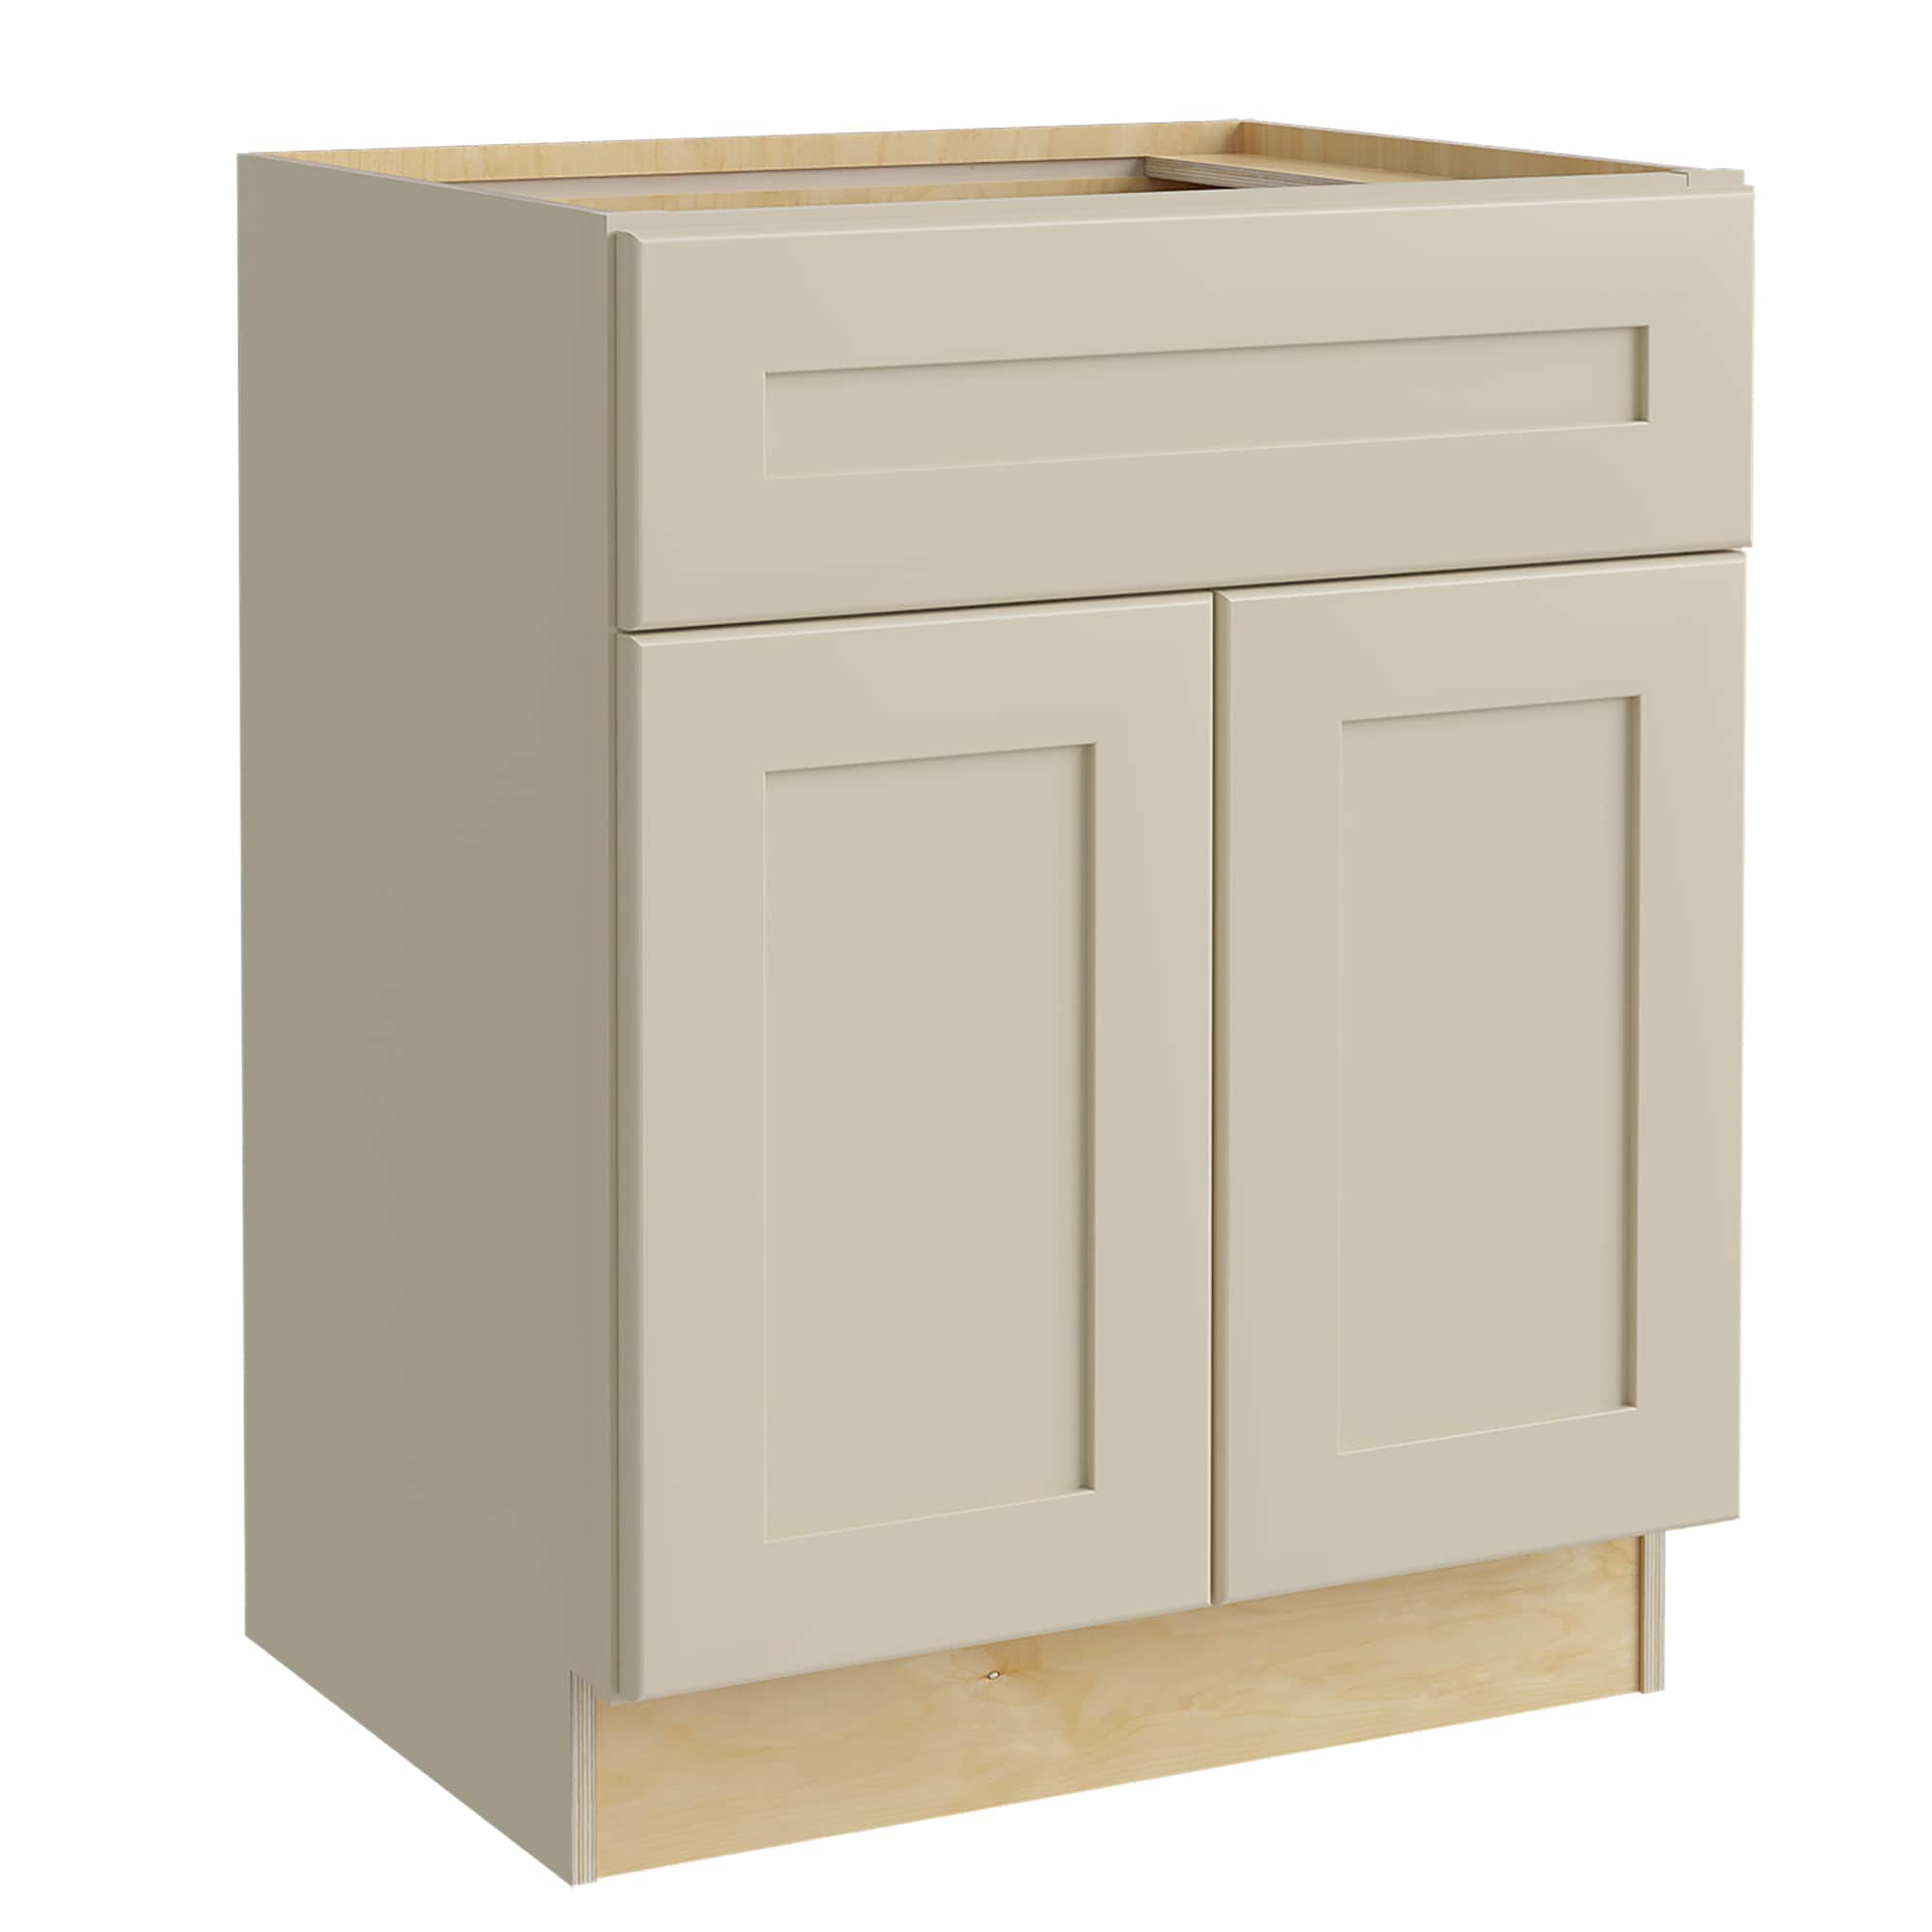 Luxxe Cabinetry 24-in W x 34.5-in H x 21-in D Norfolk Blended Cream Painted Door and Drawer Base Fully Assembled Semi-custom Cabinet in Off-White